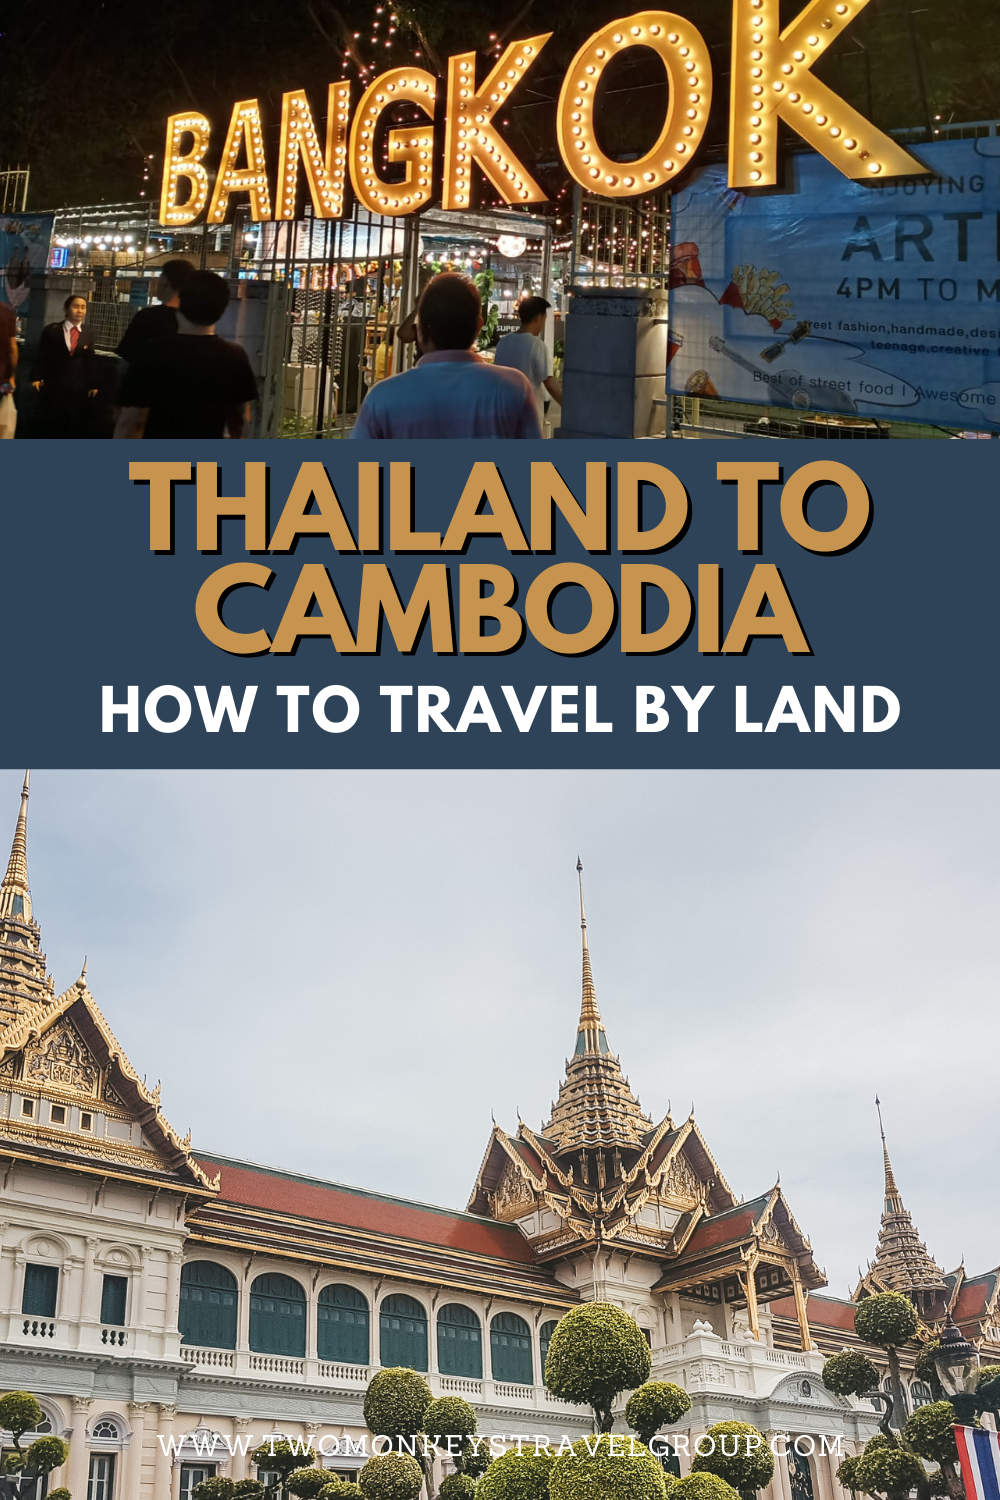 How to Travel by Land from Thailand to Cambodia (A Backpacker's Guide)